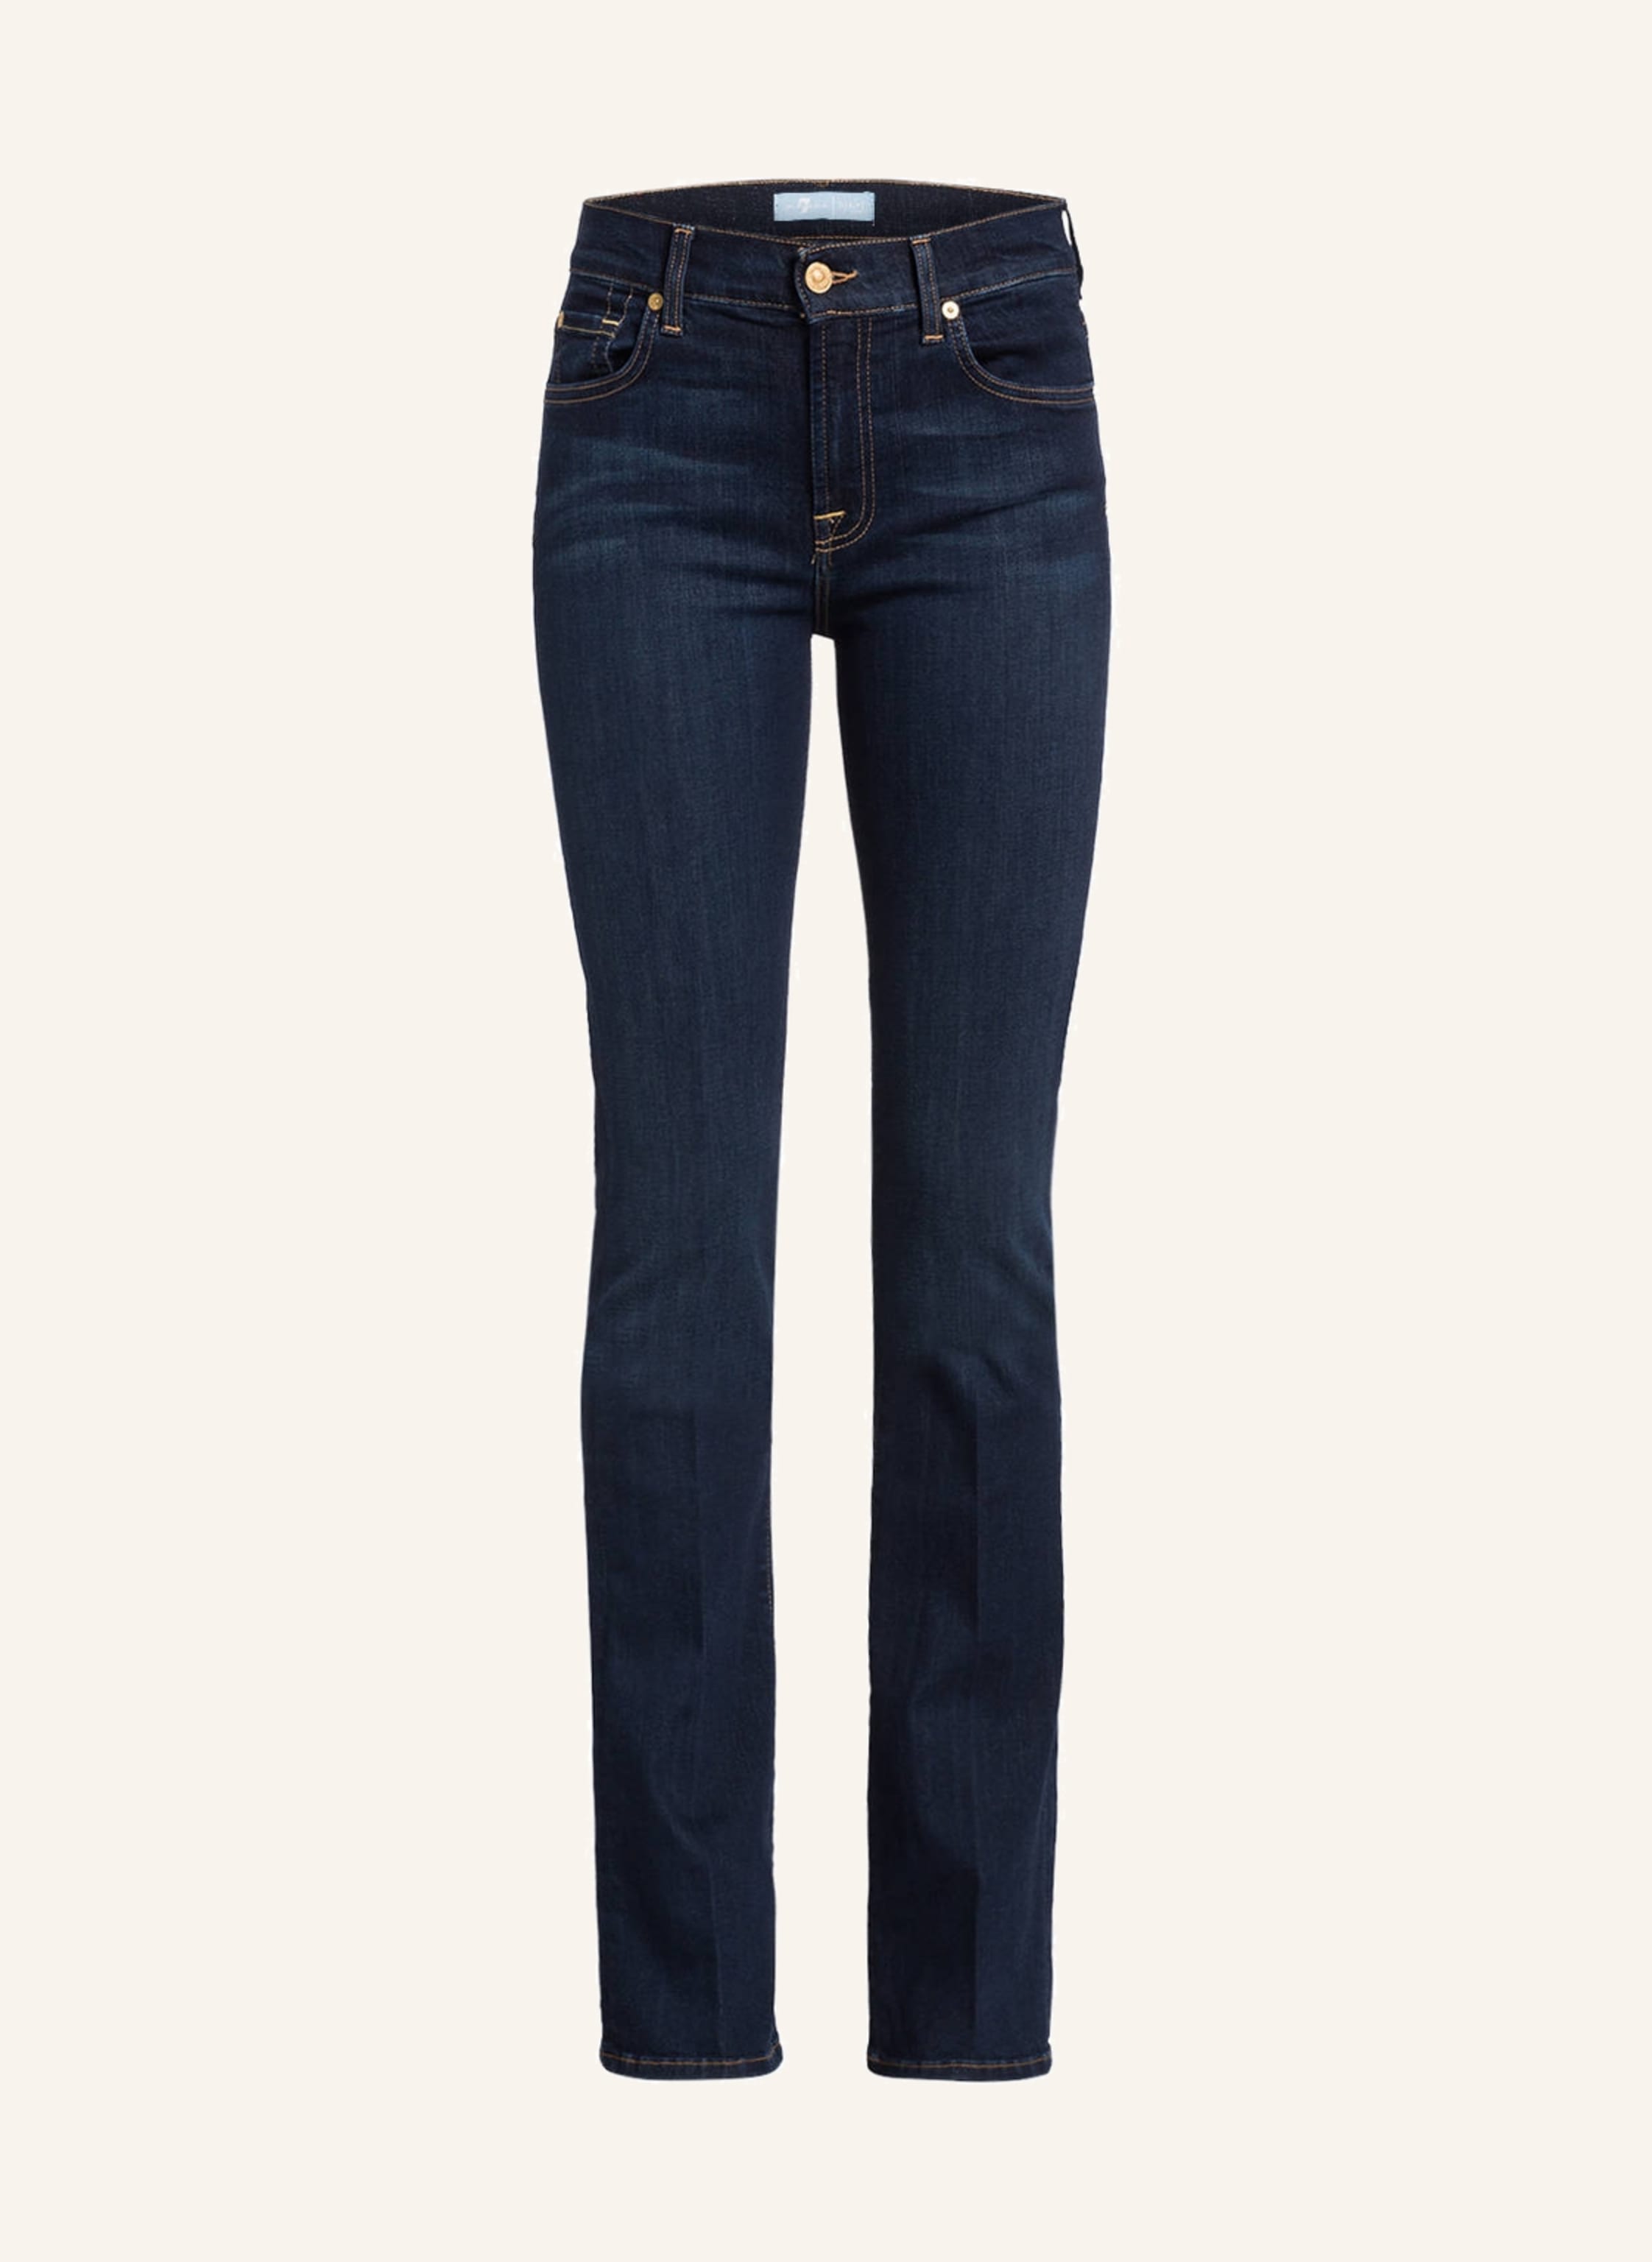 Damen Bekleidung Jeans Bootcut Jeans 7 For All Mankind Baumwolle Andere materialien jeans in Blau 